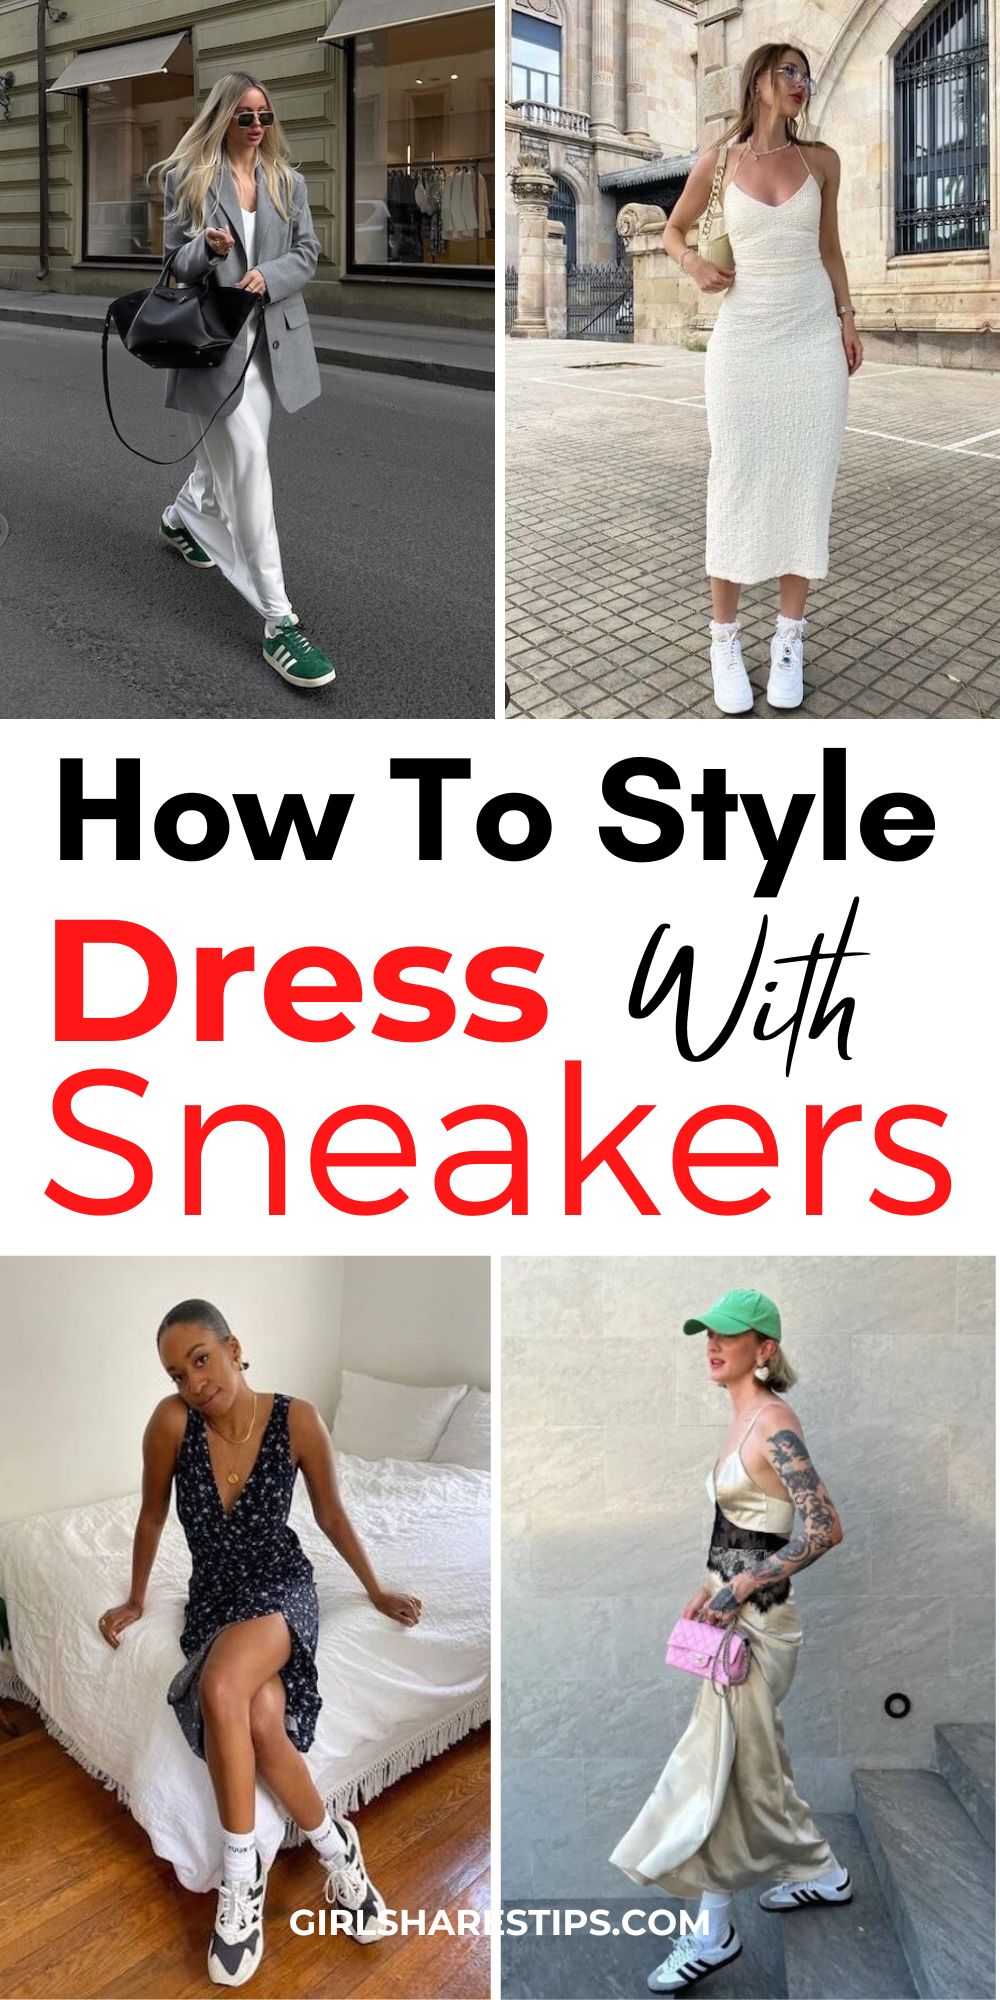 dress and sneakers outfit ideas collage